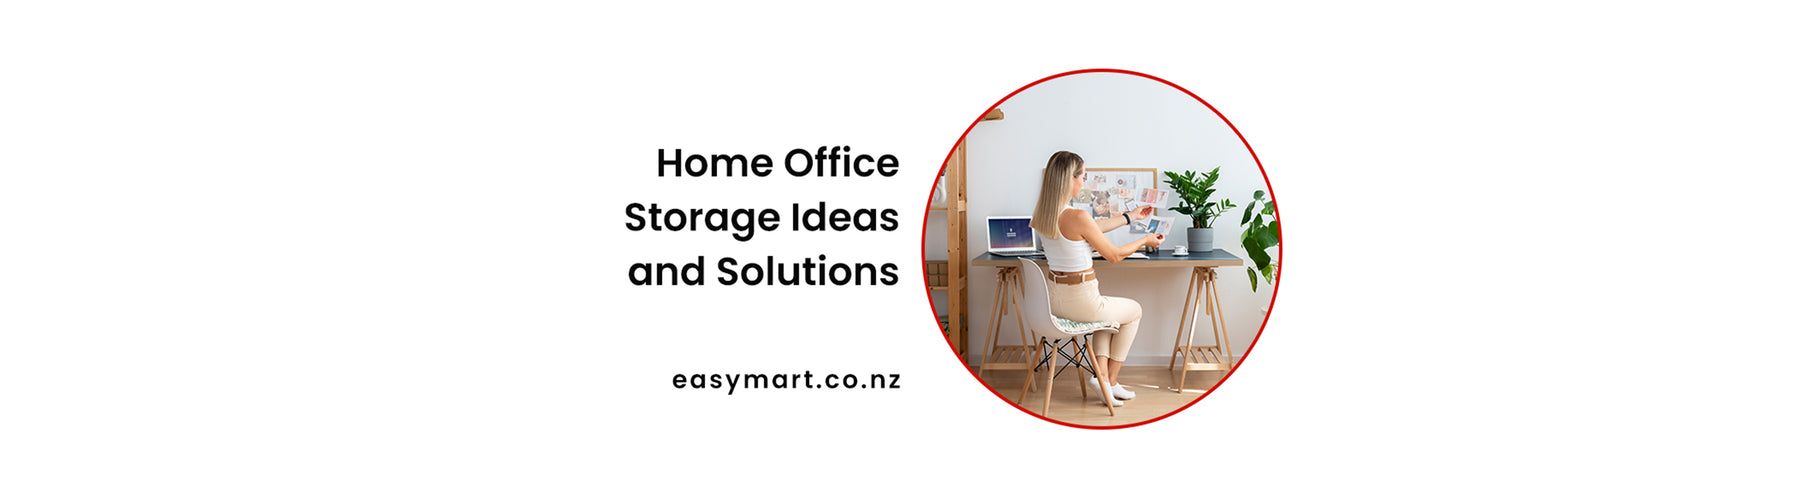 Home Office Storage Ideas and Solutions